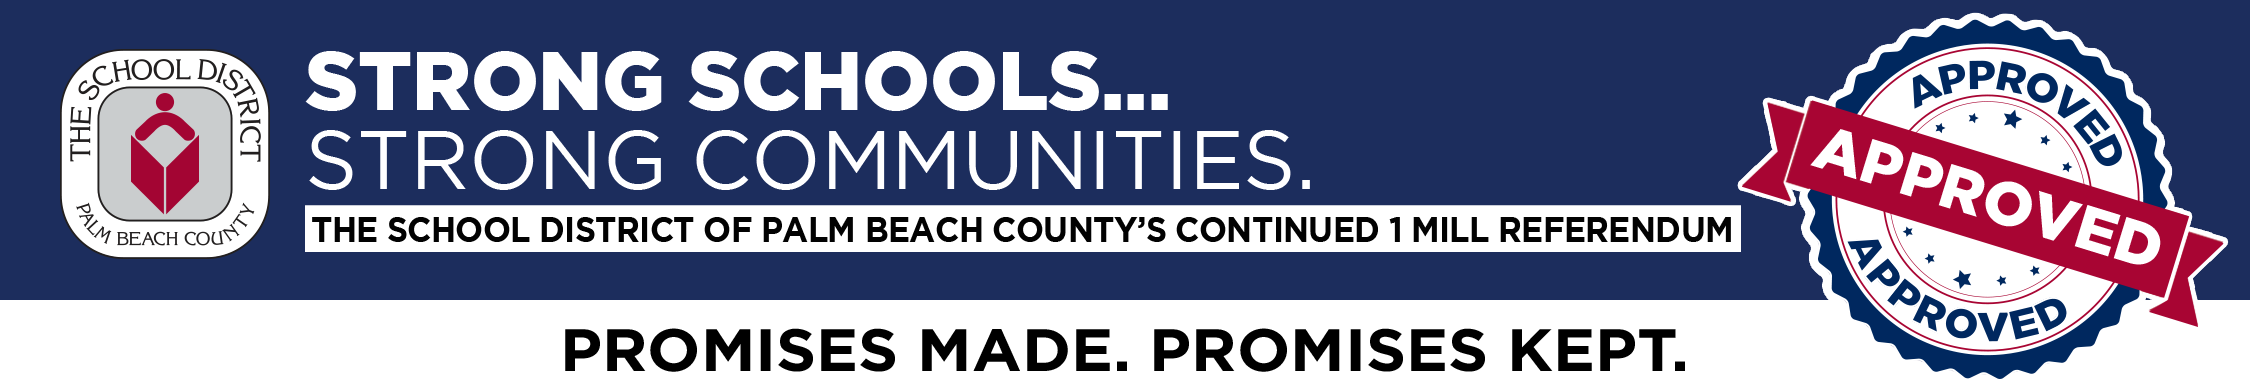 Strong Schools... Strong Communities. The School District of Palm Beach County's continued 1 mill referendum. Approved